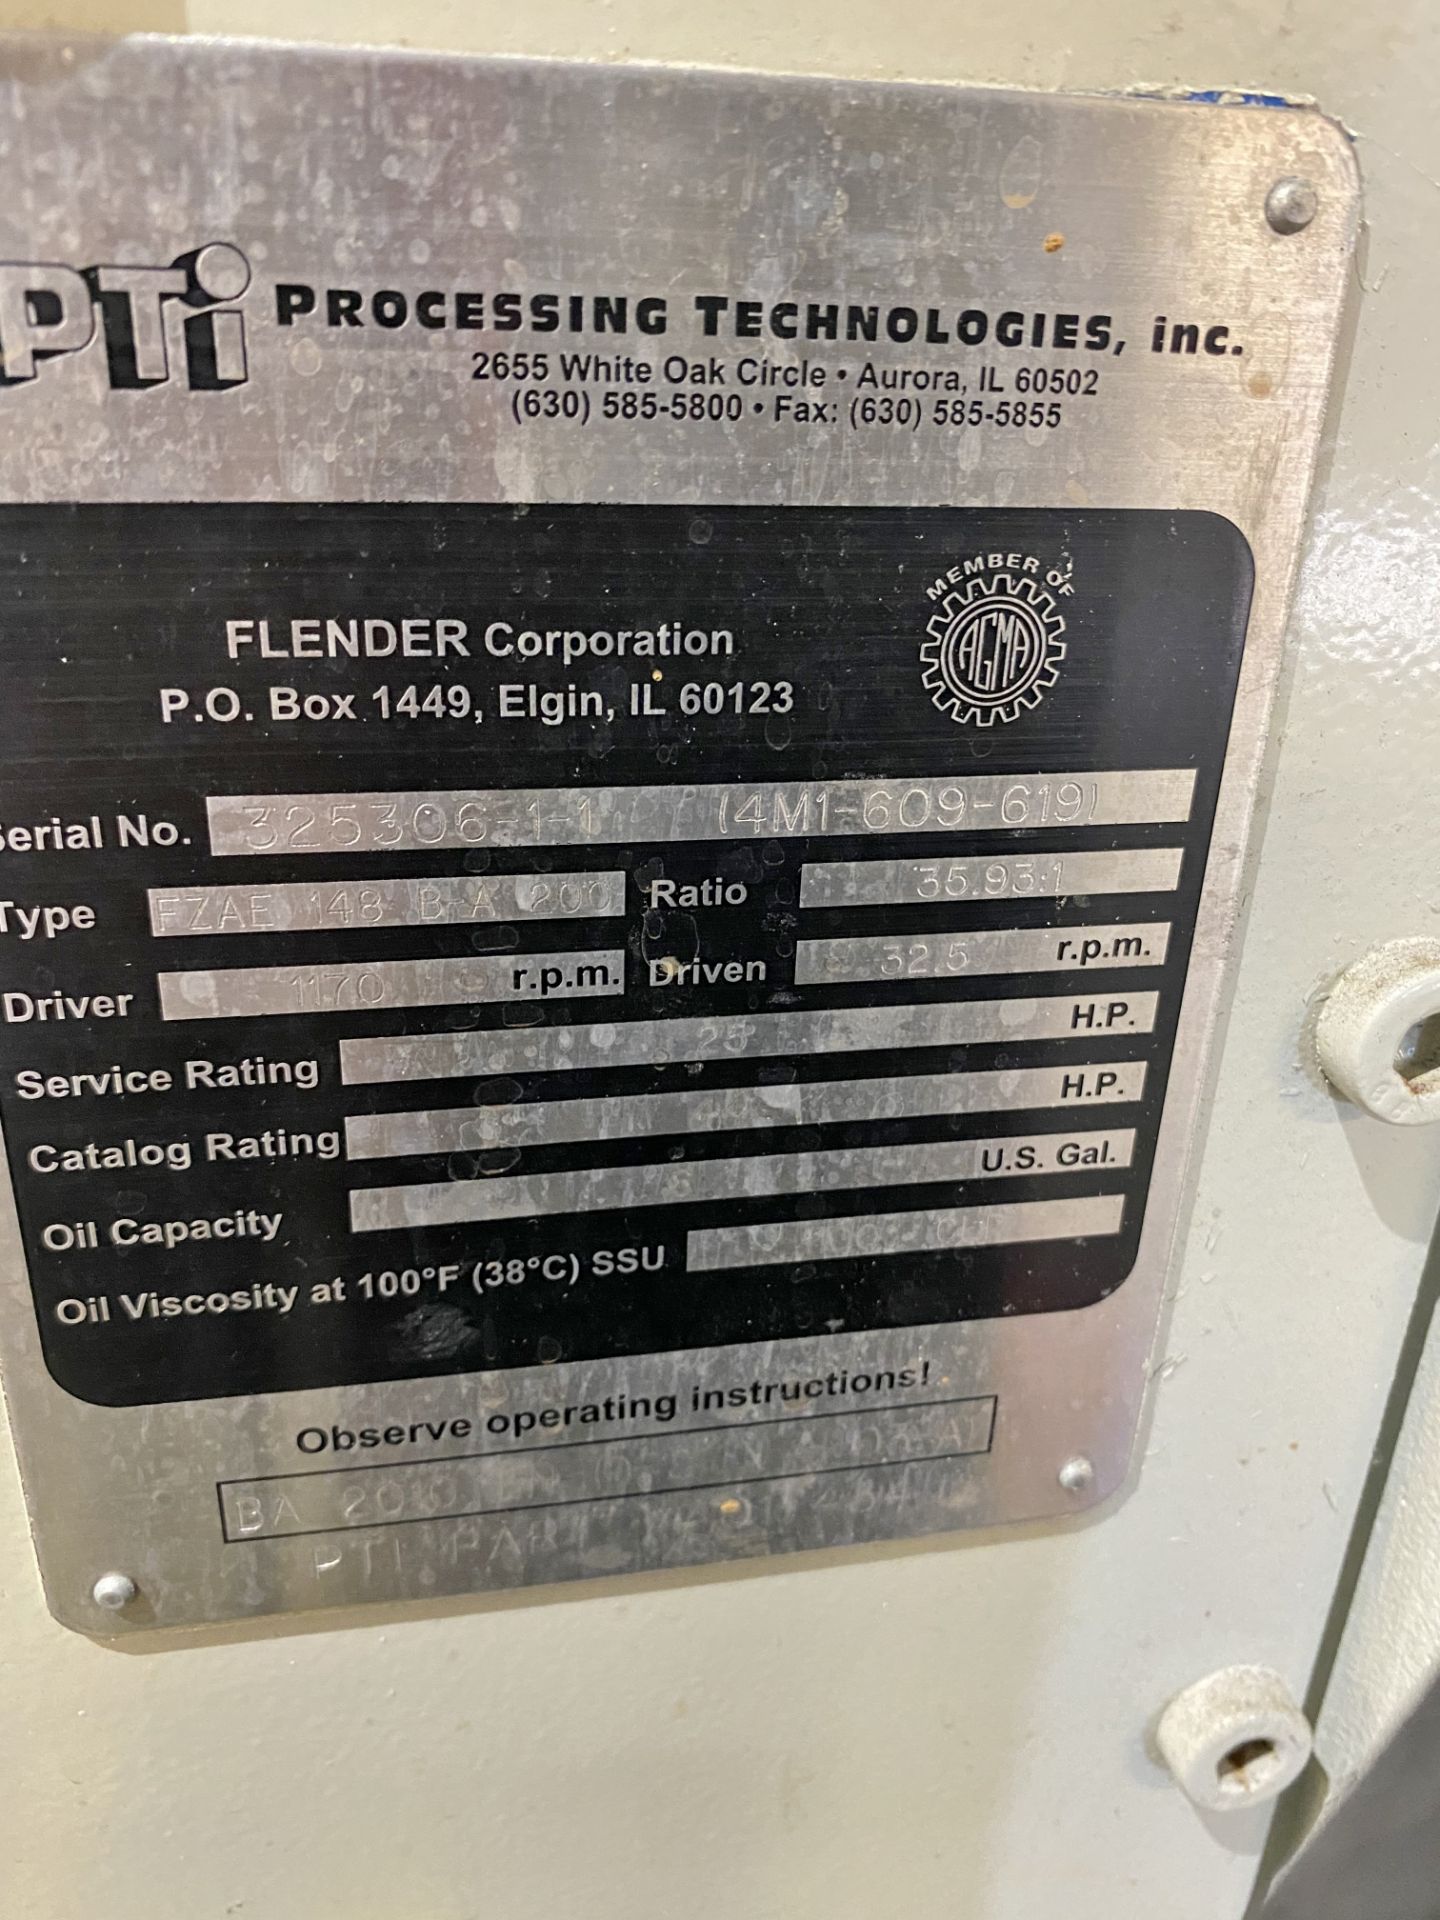 PTI 2" Extruder Trident 2000 25 HP - Image 9 of 9